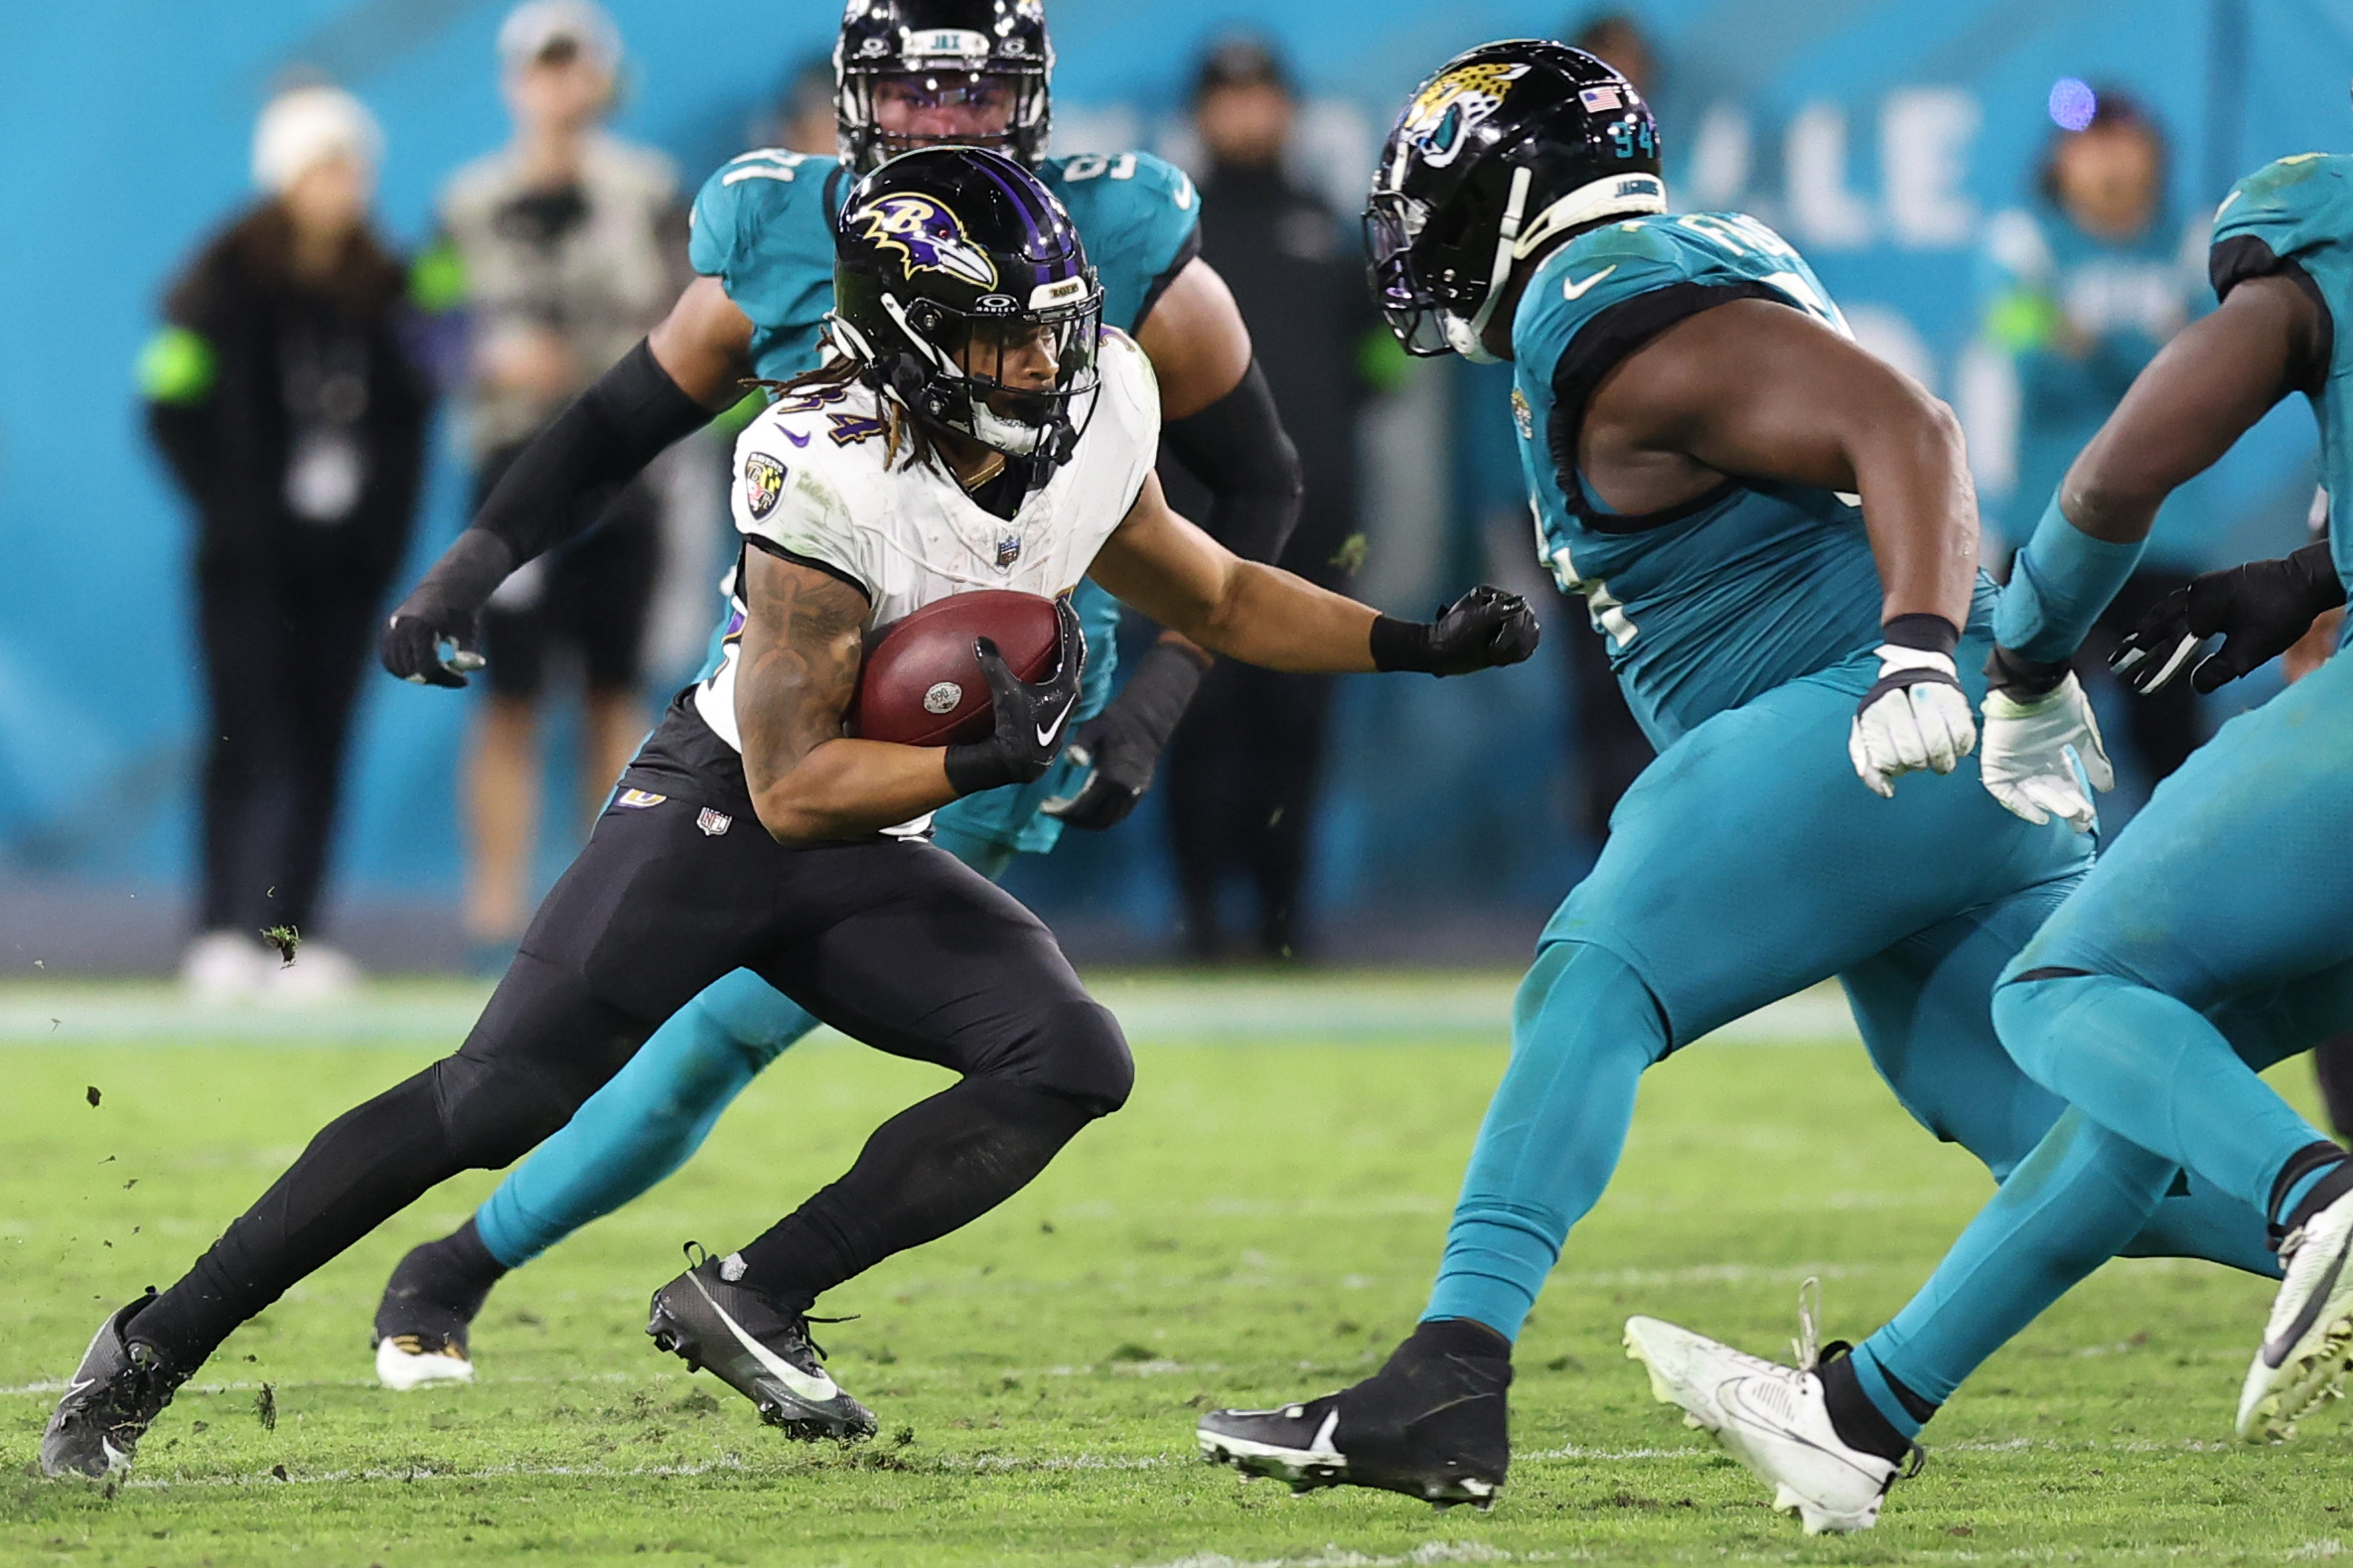 Running back Keaton Mitchell (L) of the Baltimore Ravens runs with the ball in the game against the Jacksonville Jaguars at EverBank Stadium in Jacksonville, Florida, December 17, 2023. /CFP